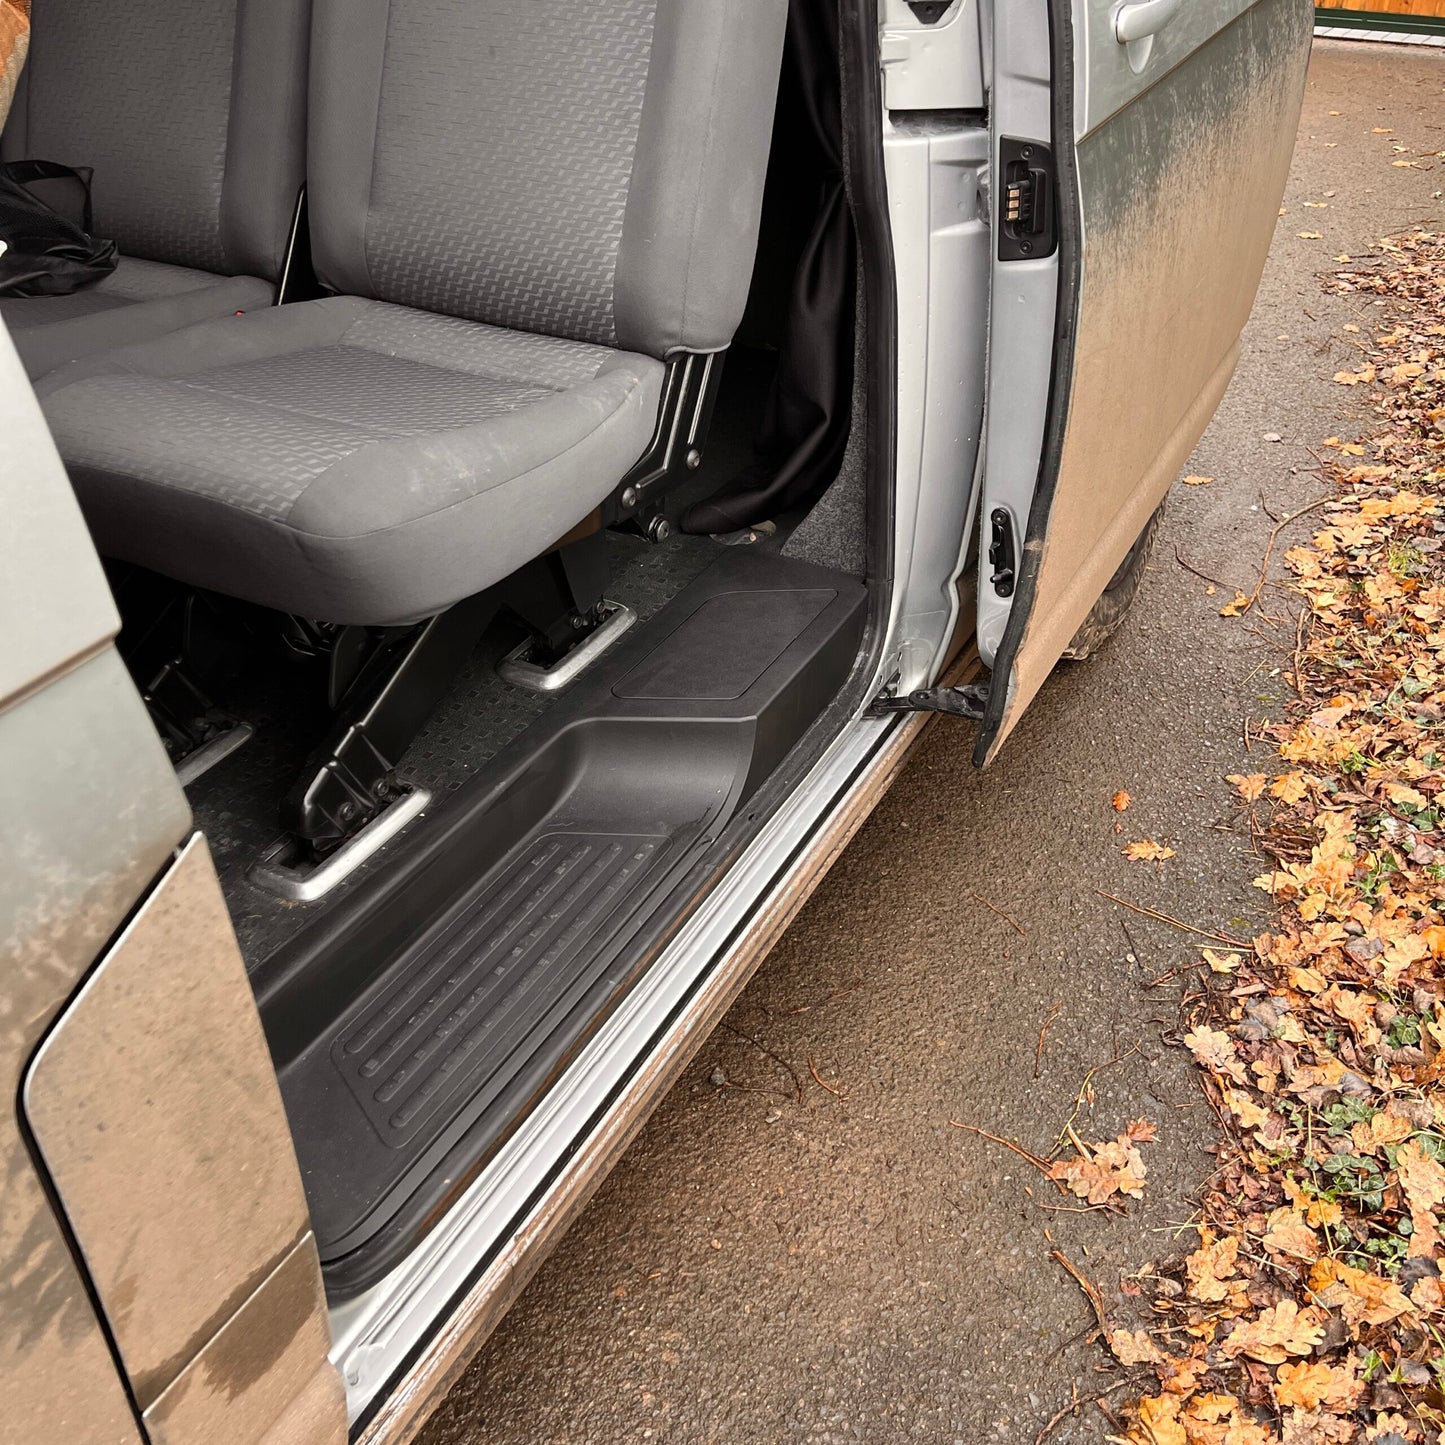 VW T6.1 Transporter Side Loading Door Step V3 17mm Extra Deep with Storage Compartment (B-Grade)